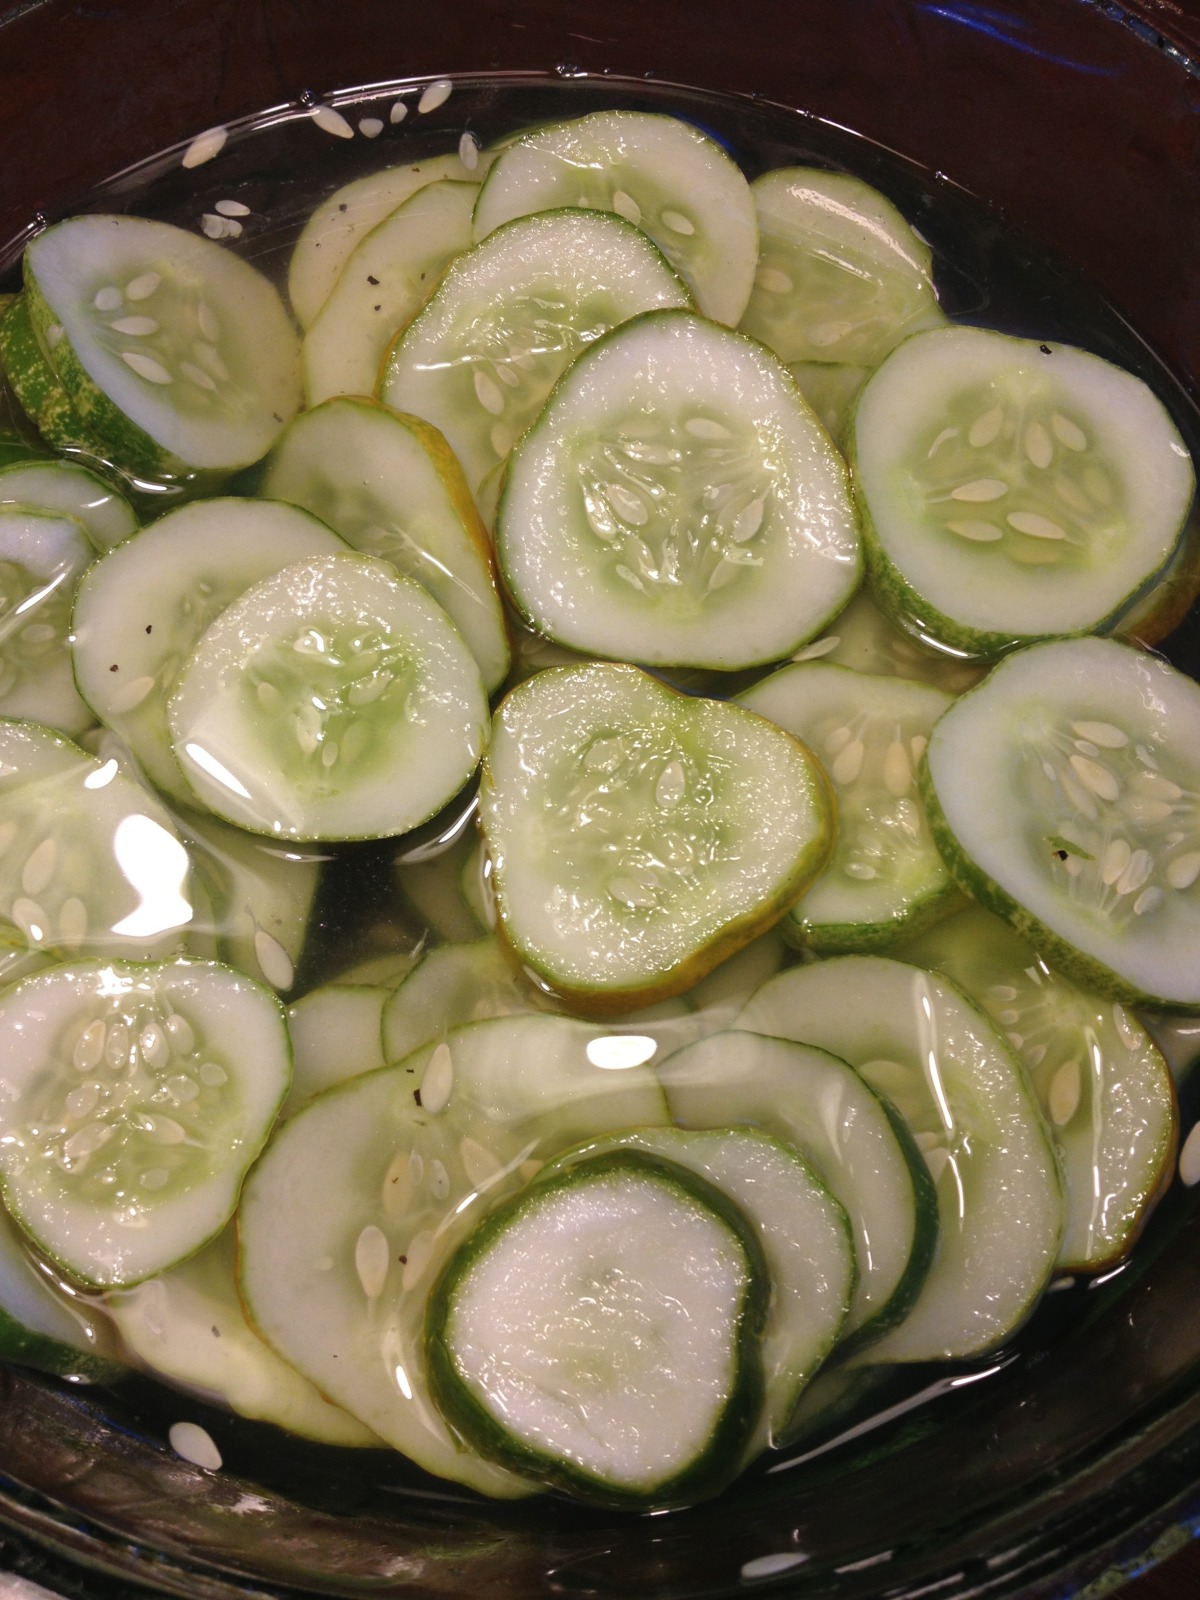 Vinegar Marinated Cucumbers - The Wholesome Dish